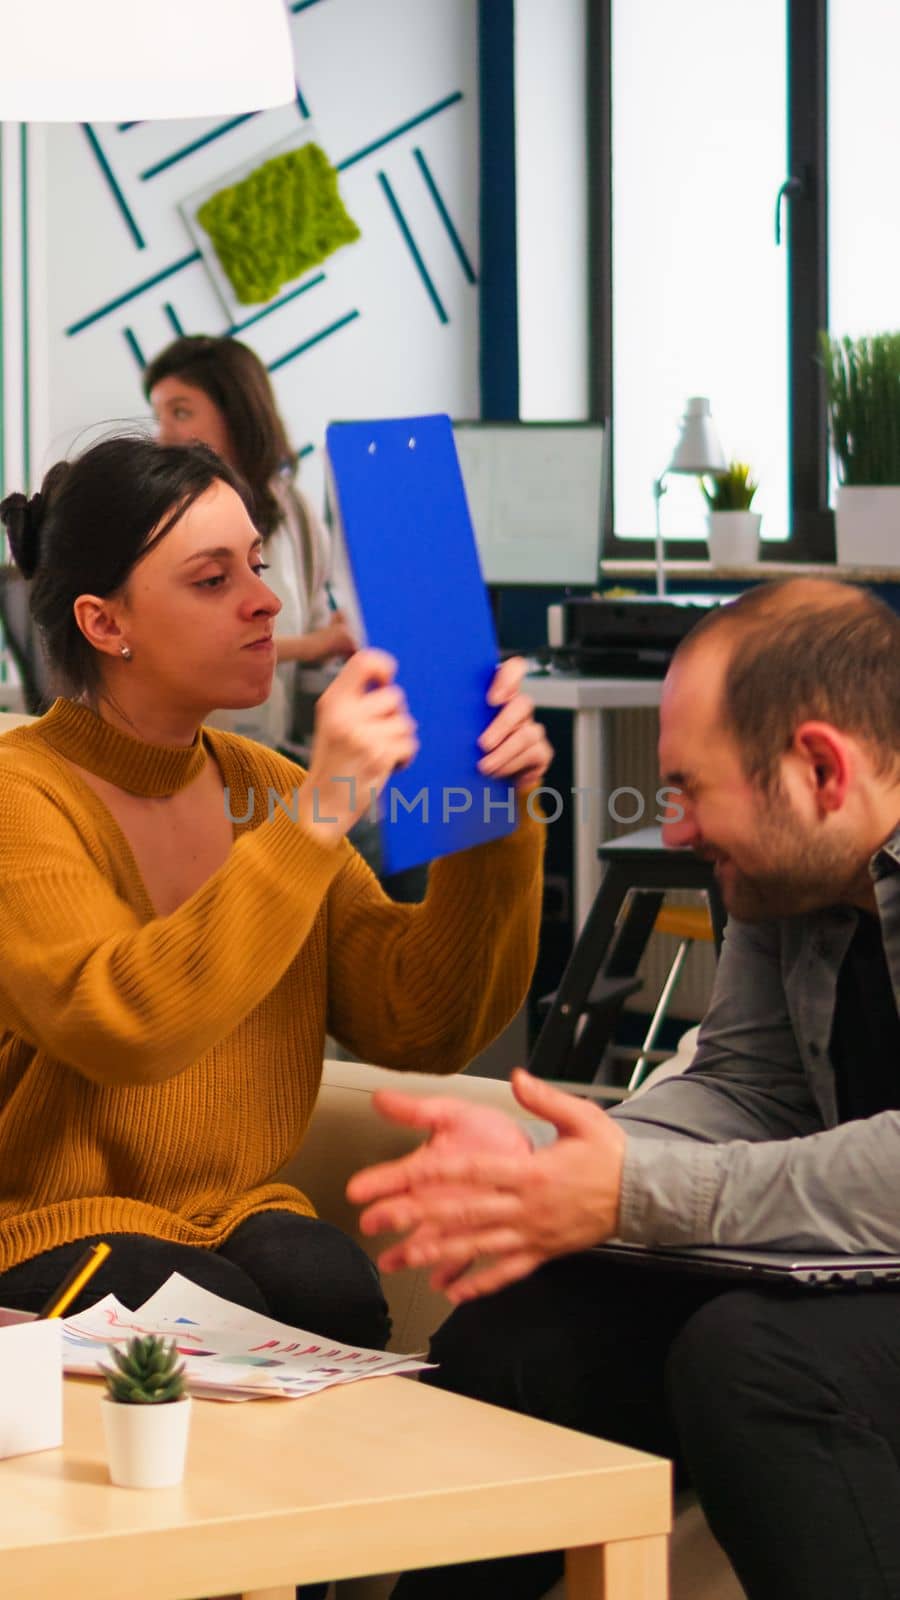 Angry manager woman screaming at diverse employees disagreeing about bad business contract, hitting man with clipboard in head sitting on couch at office desk, conflict dispute about document